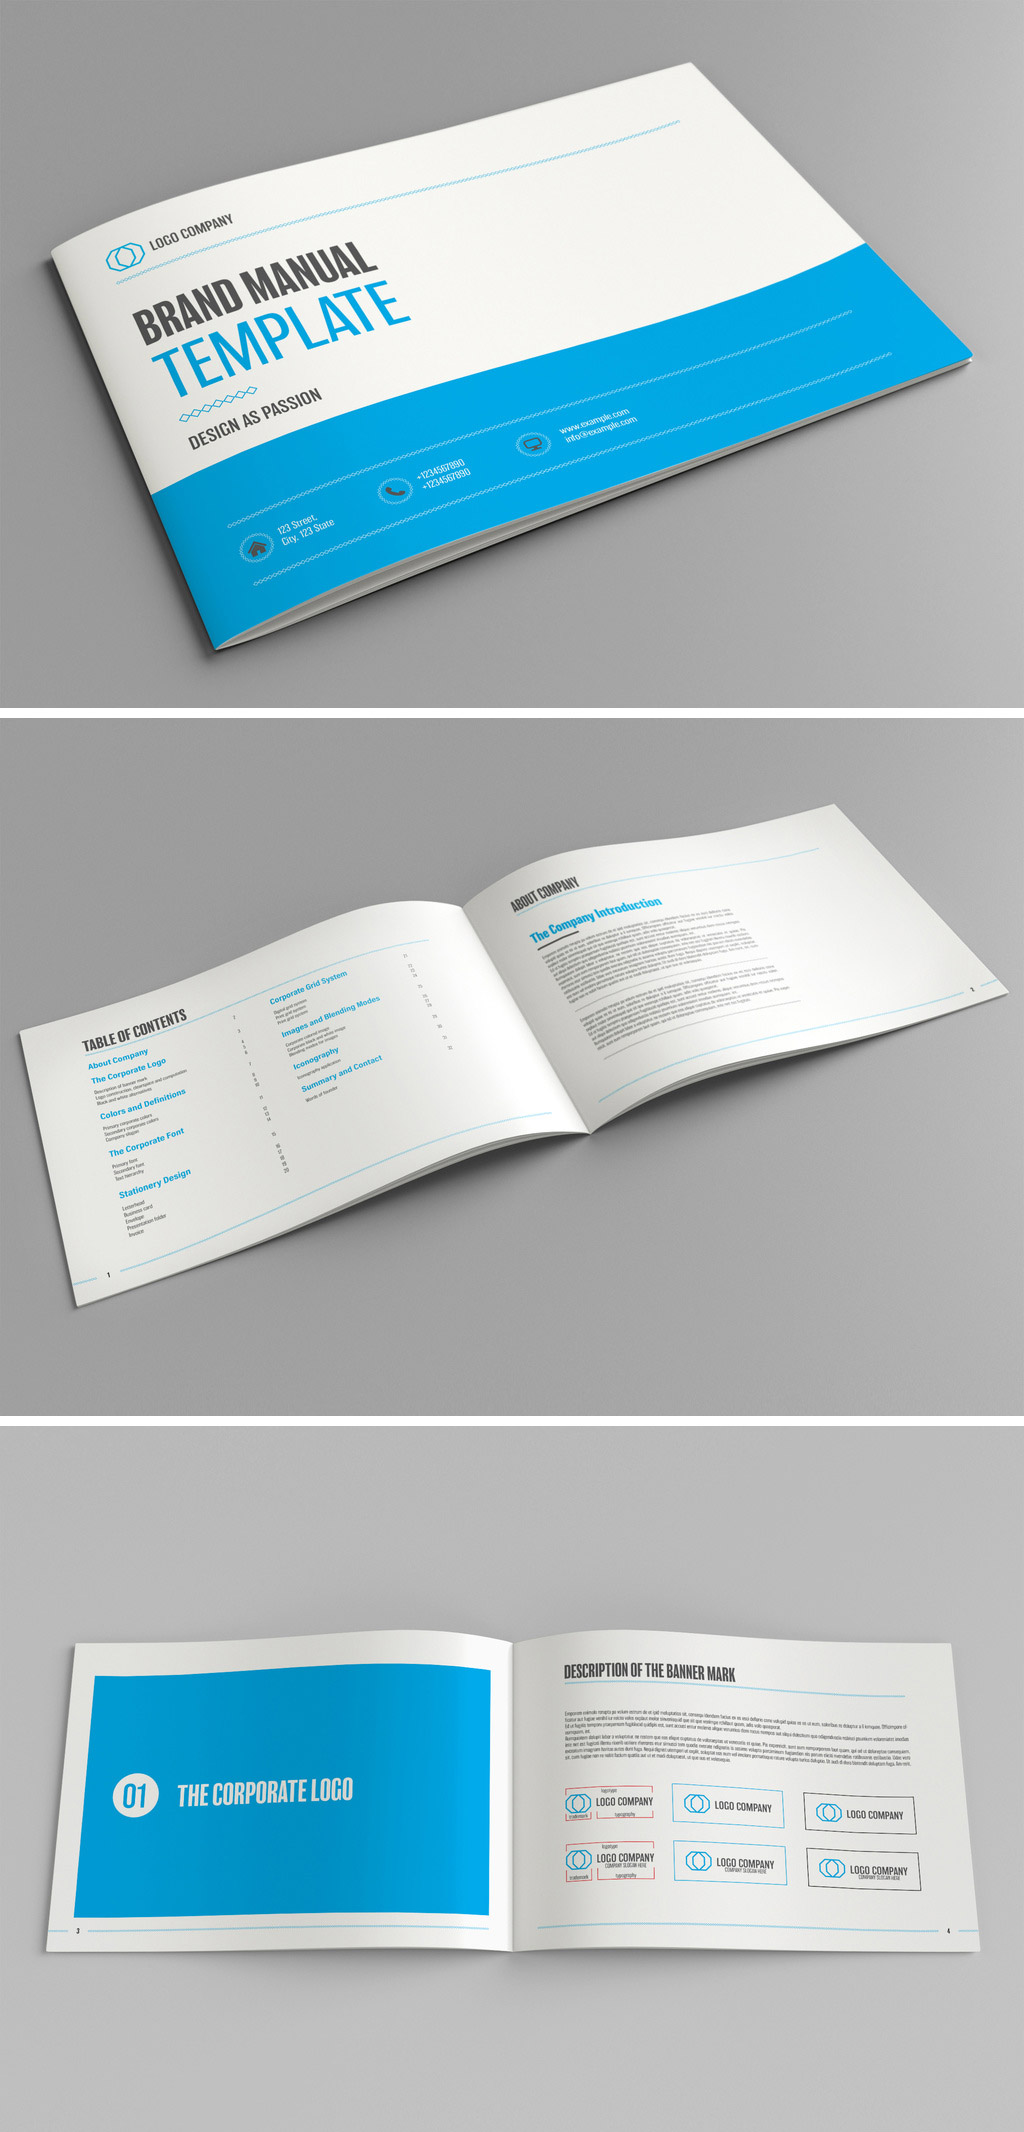 Brand Manual Template with Blue Accents